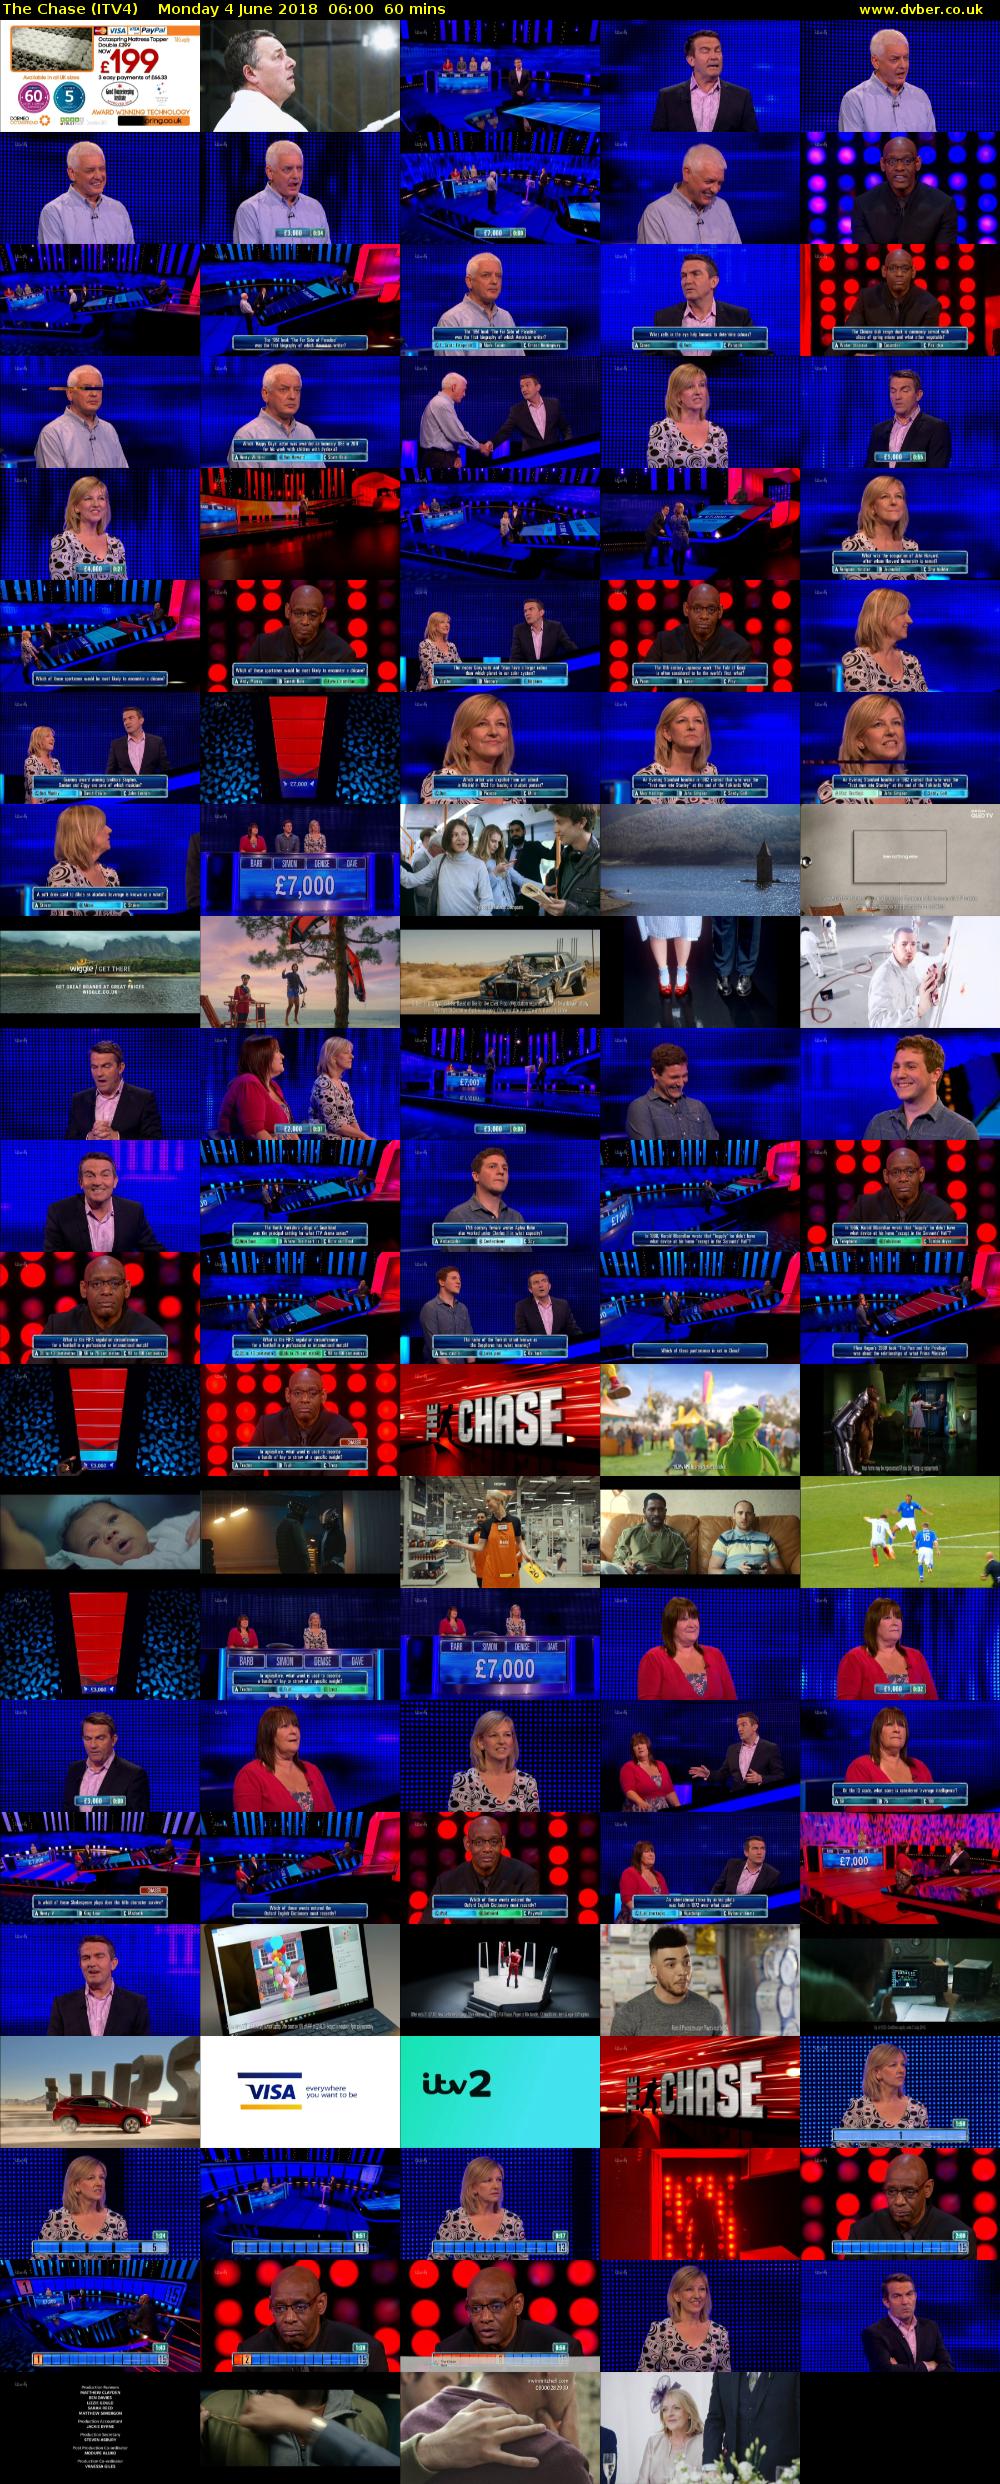 The Chase (ITV4) Monday 4 June 2018 06:00 - 07:00